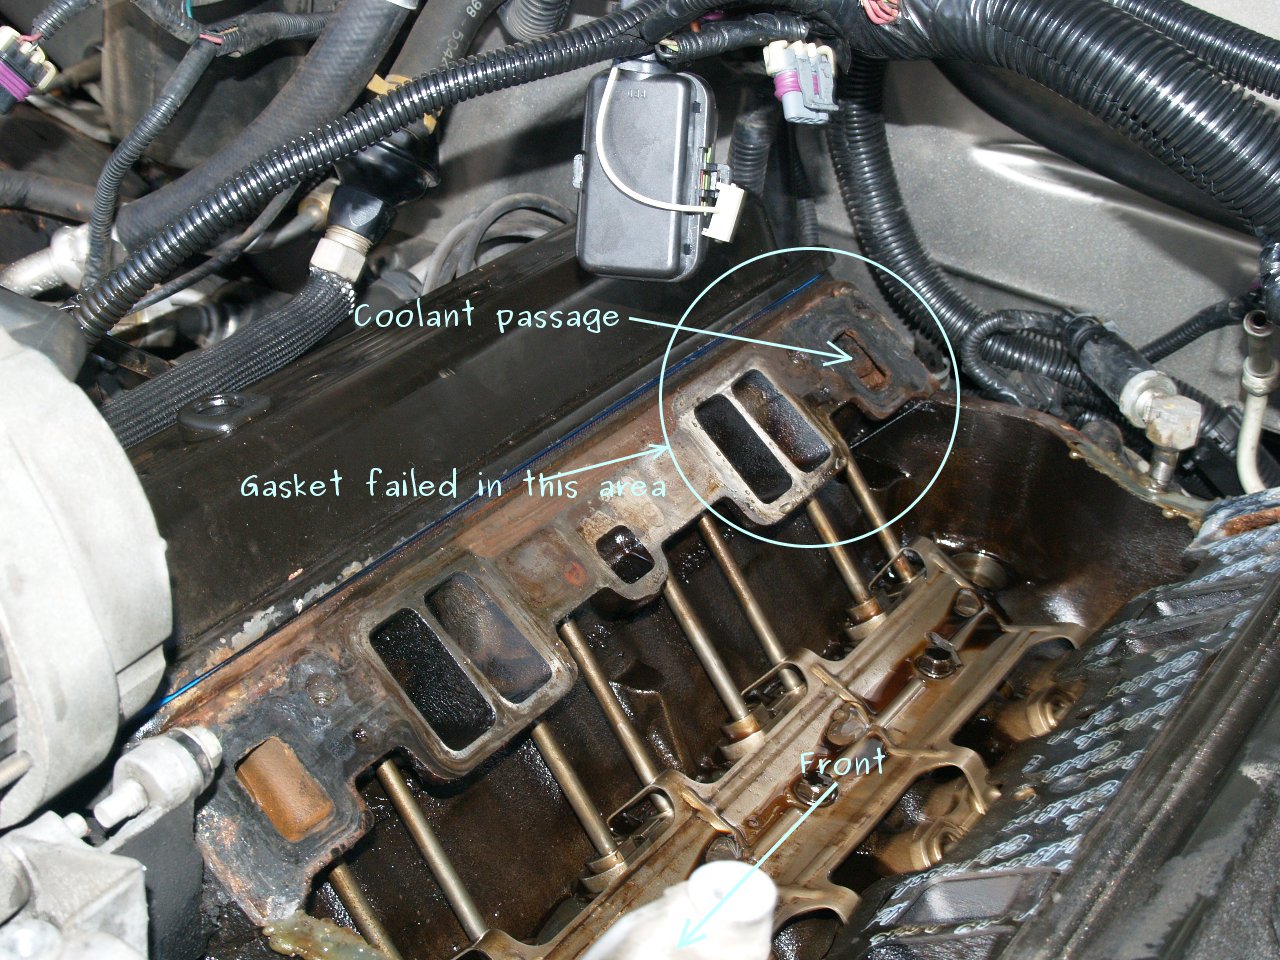 See P385E in engine